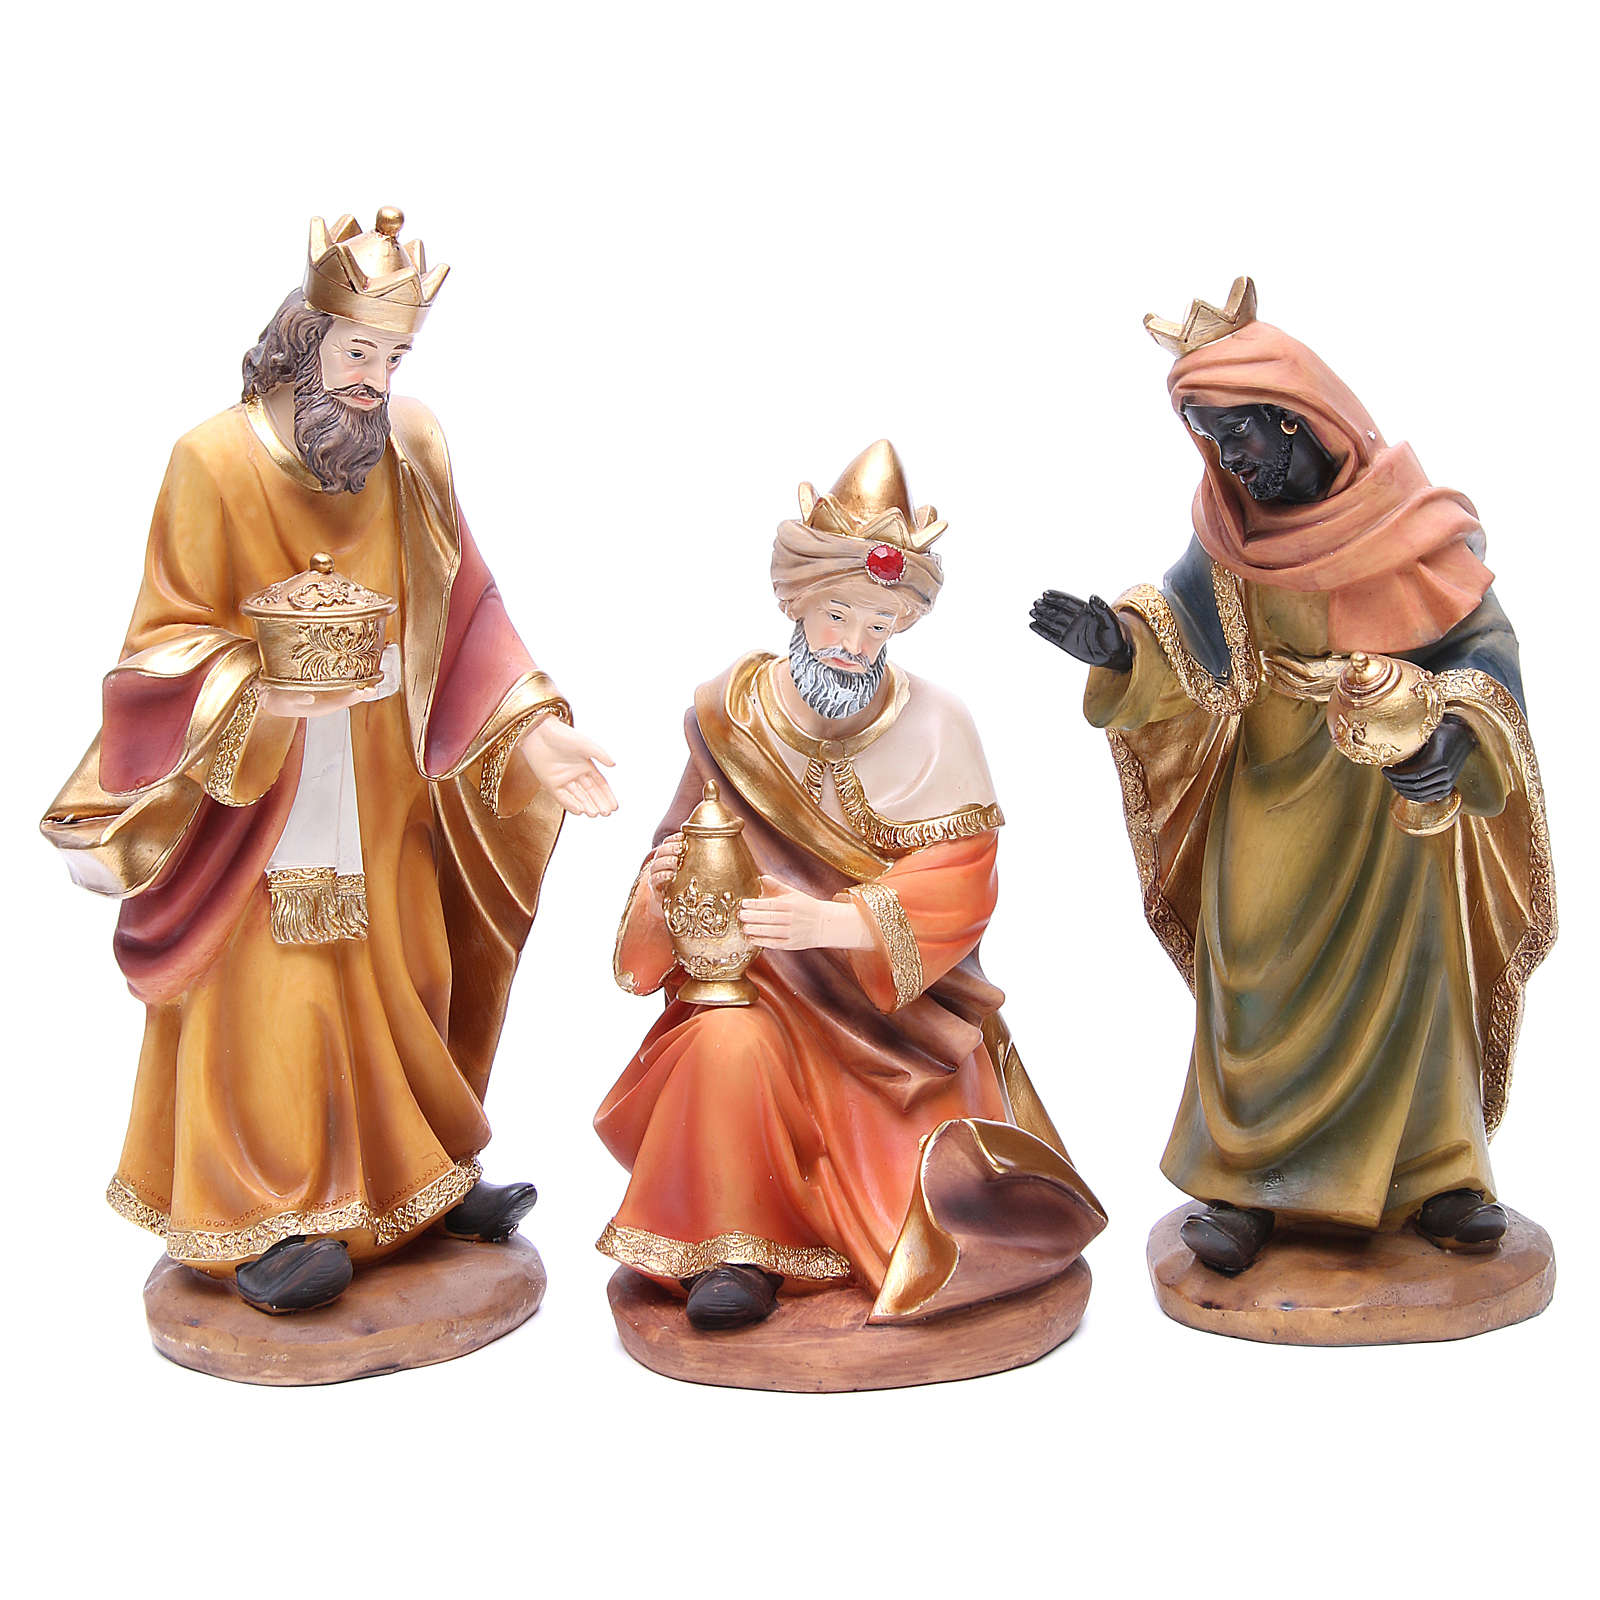 Nativity set in resin measuring 30cm complete with 11 characters ...